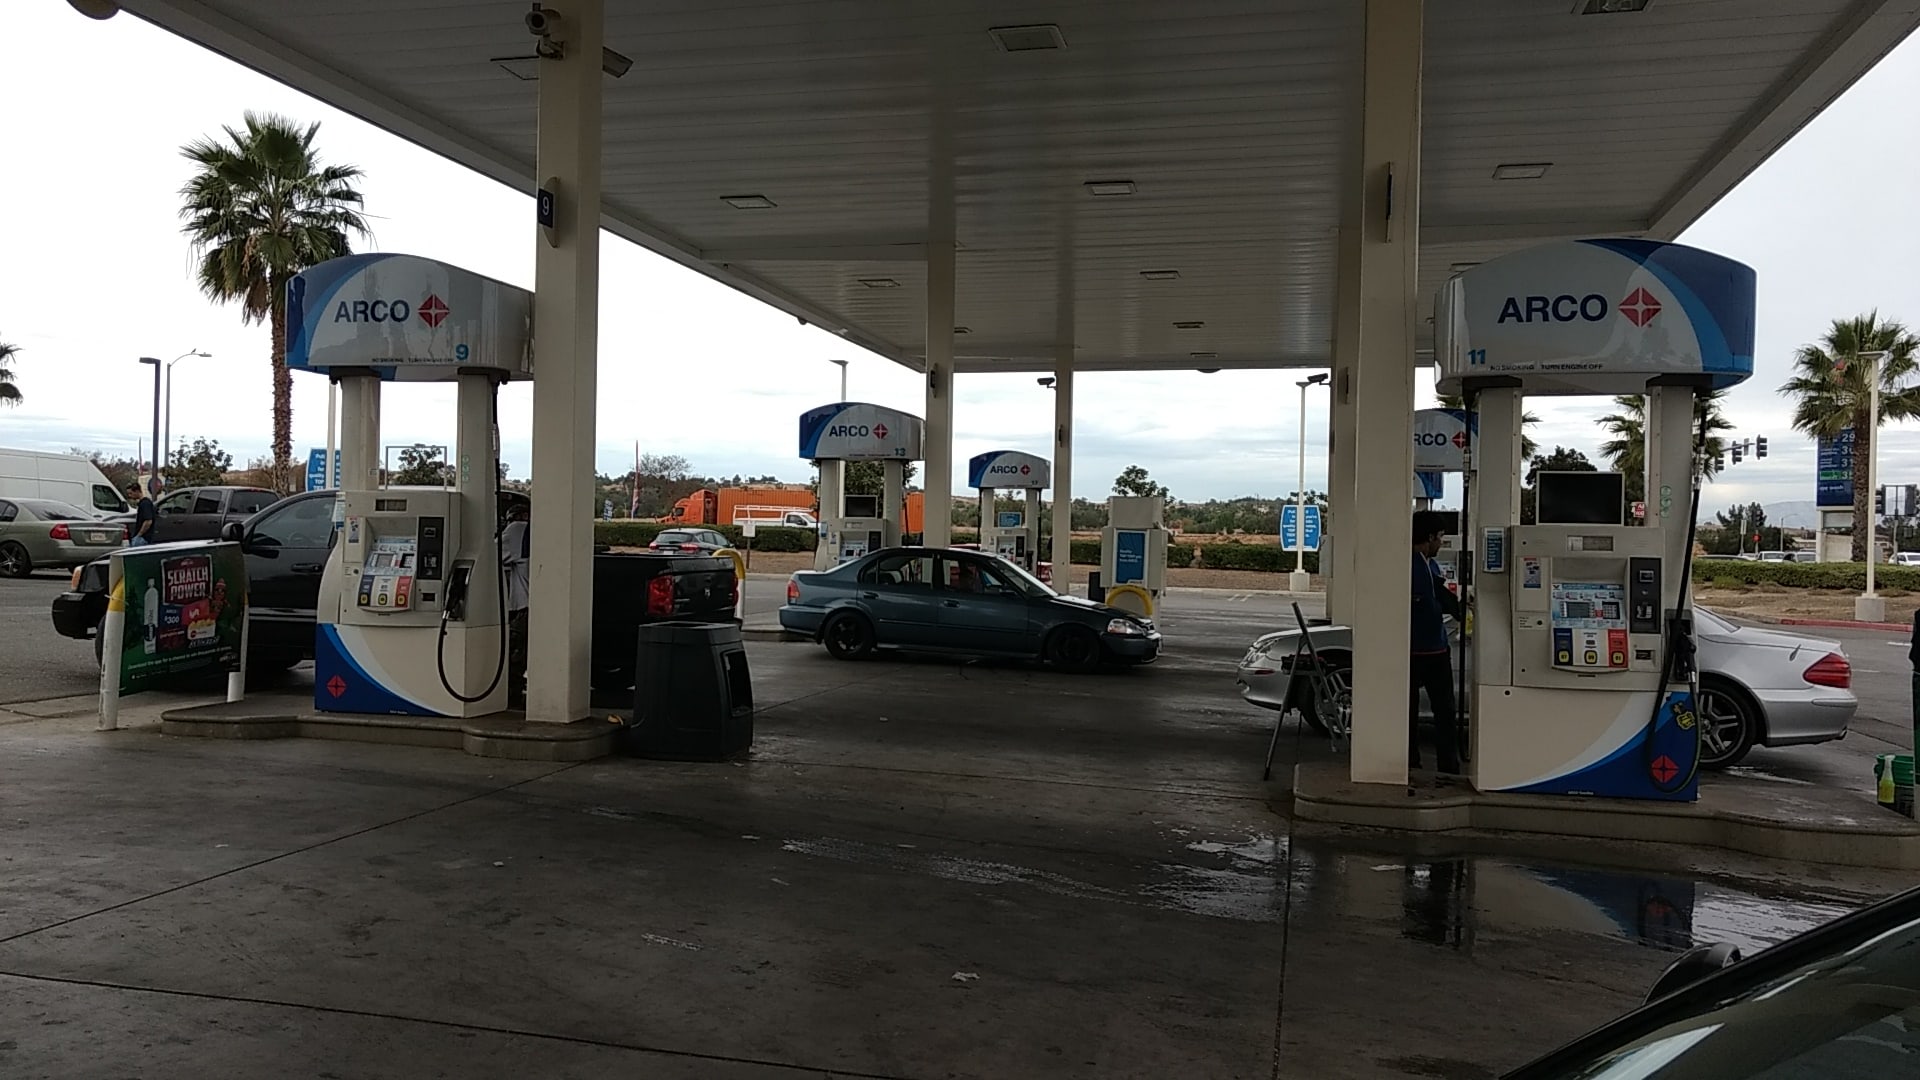 ARCO - Perris (CA 92571), US, any gas station nearby